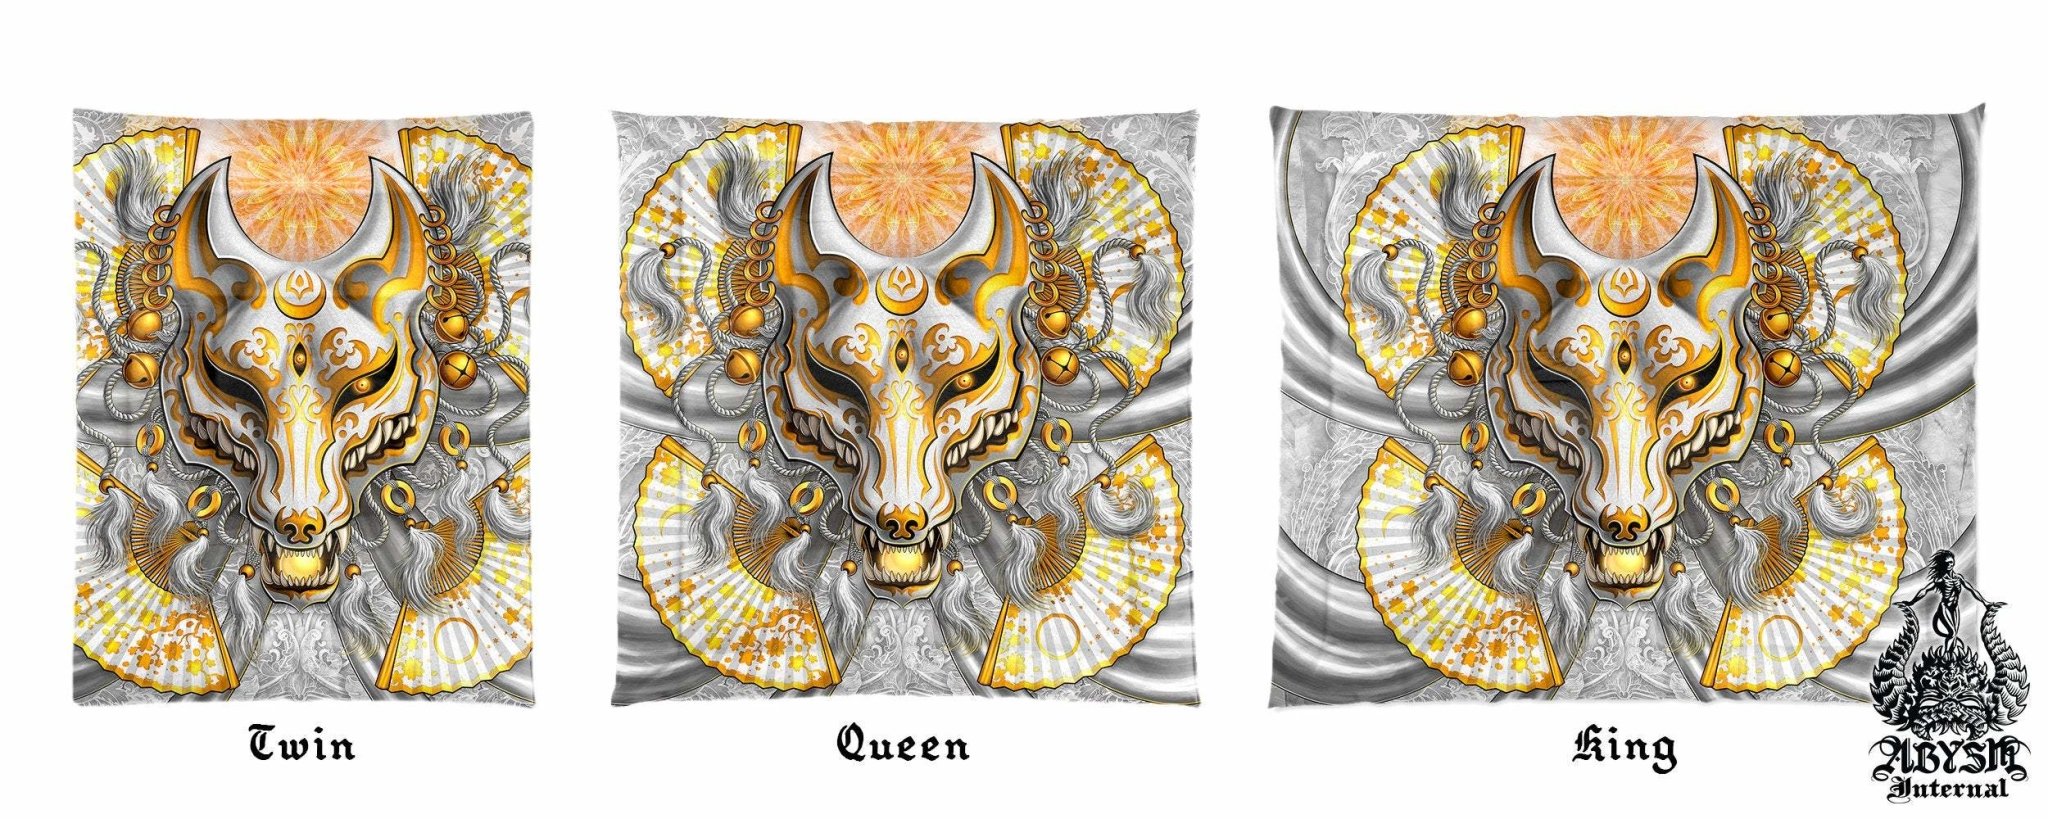 Kitsune Mask Bedding Set, Comforter and Duvet, Fox Okami and Anime Bed Cover and Bedroom Decor, King, Queen and Twin Size - White and Gold - Abysm Internal